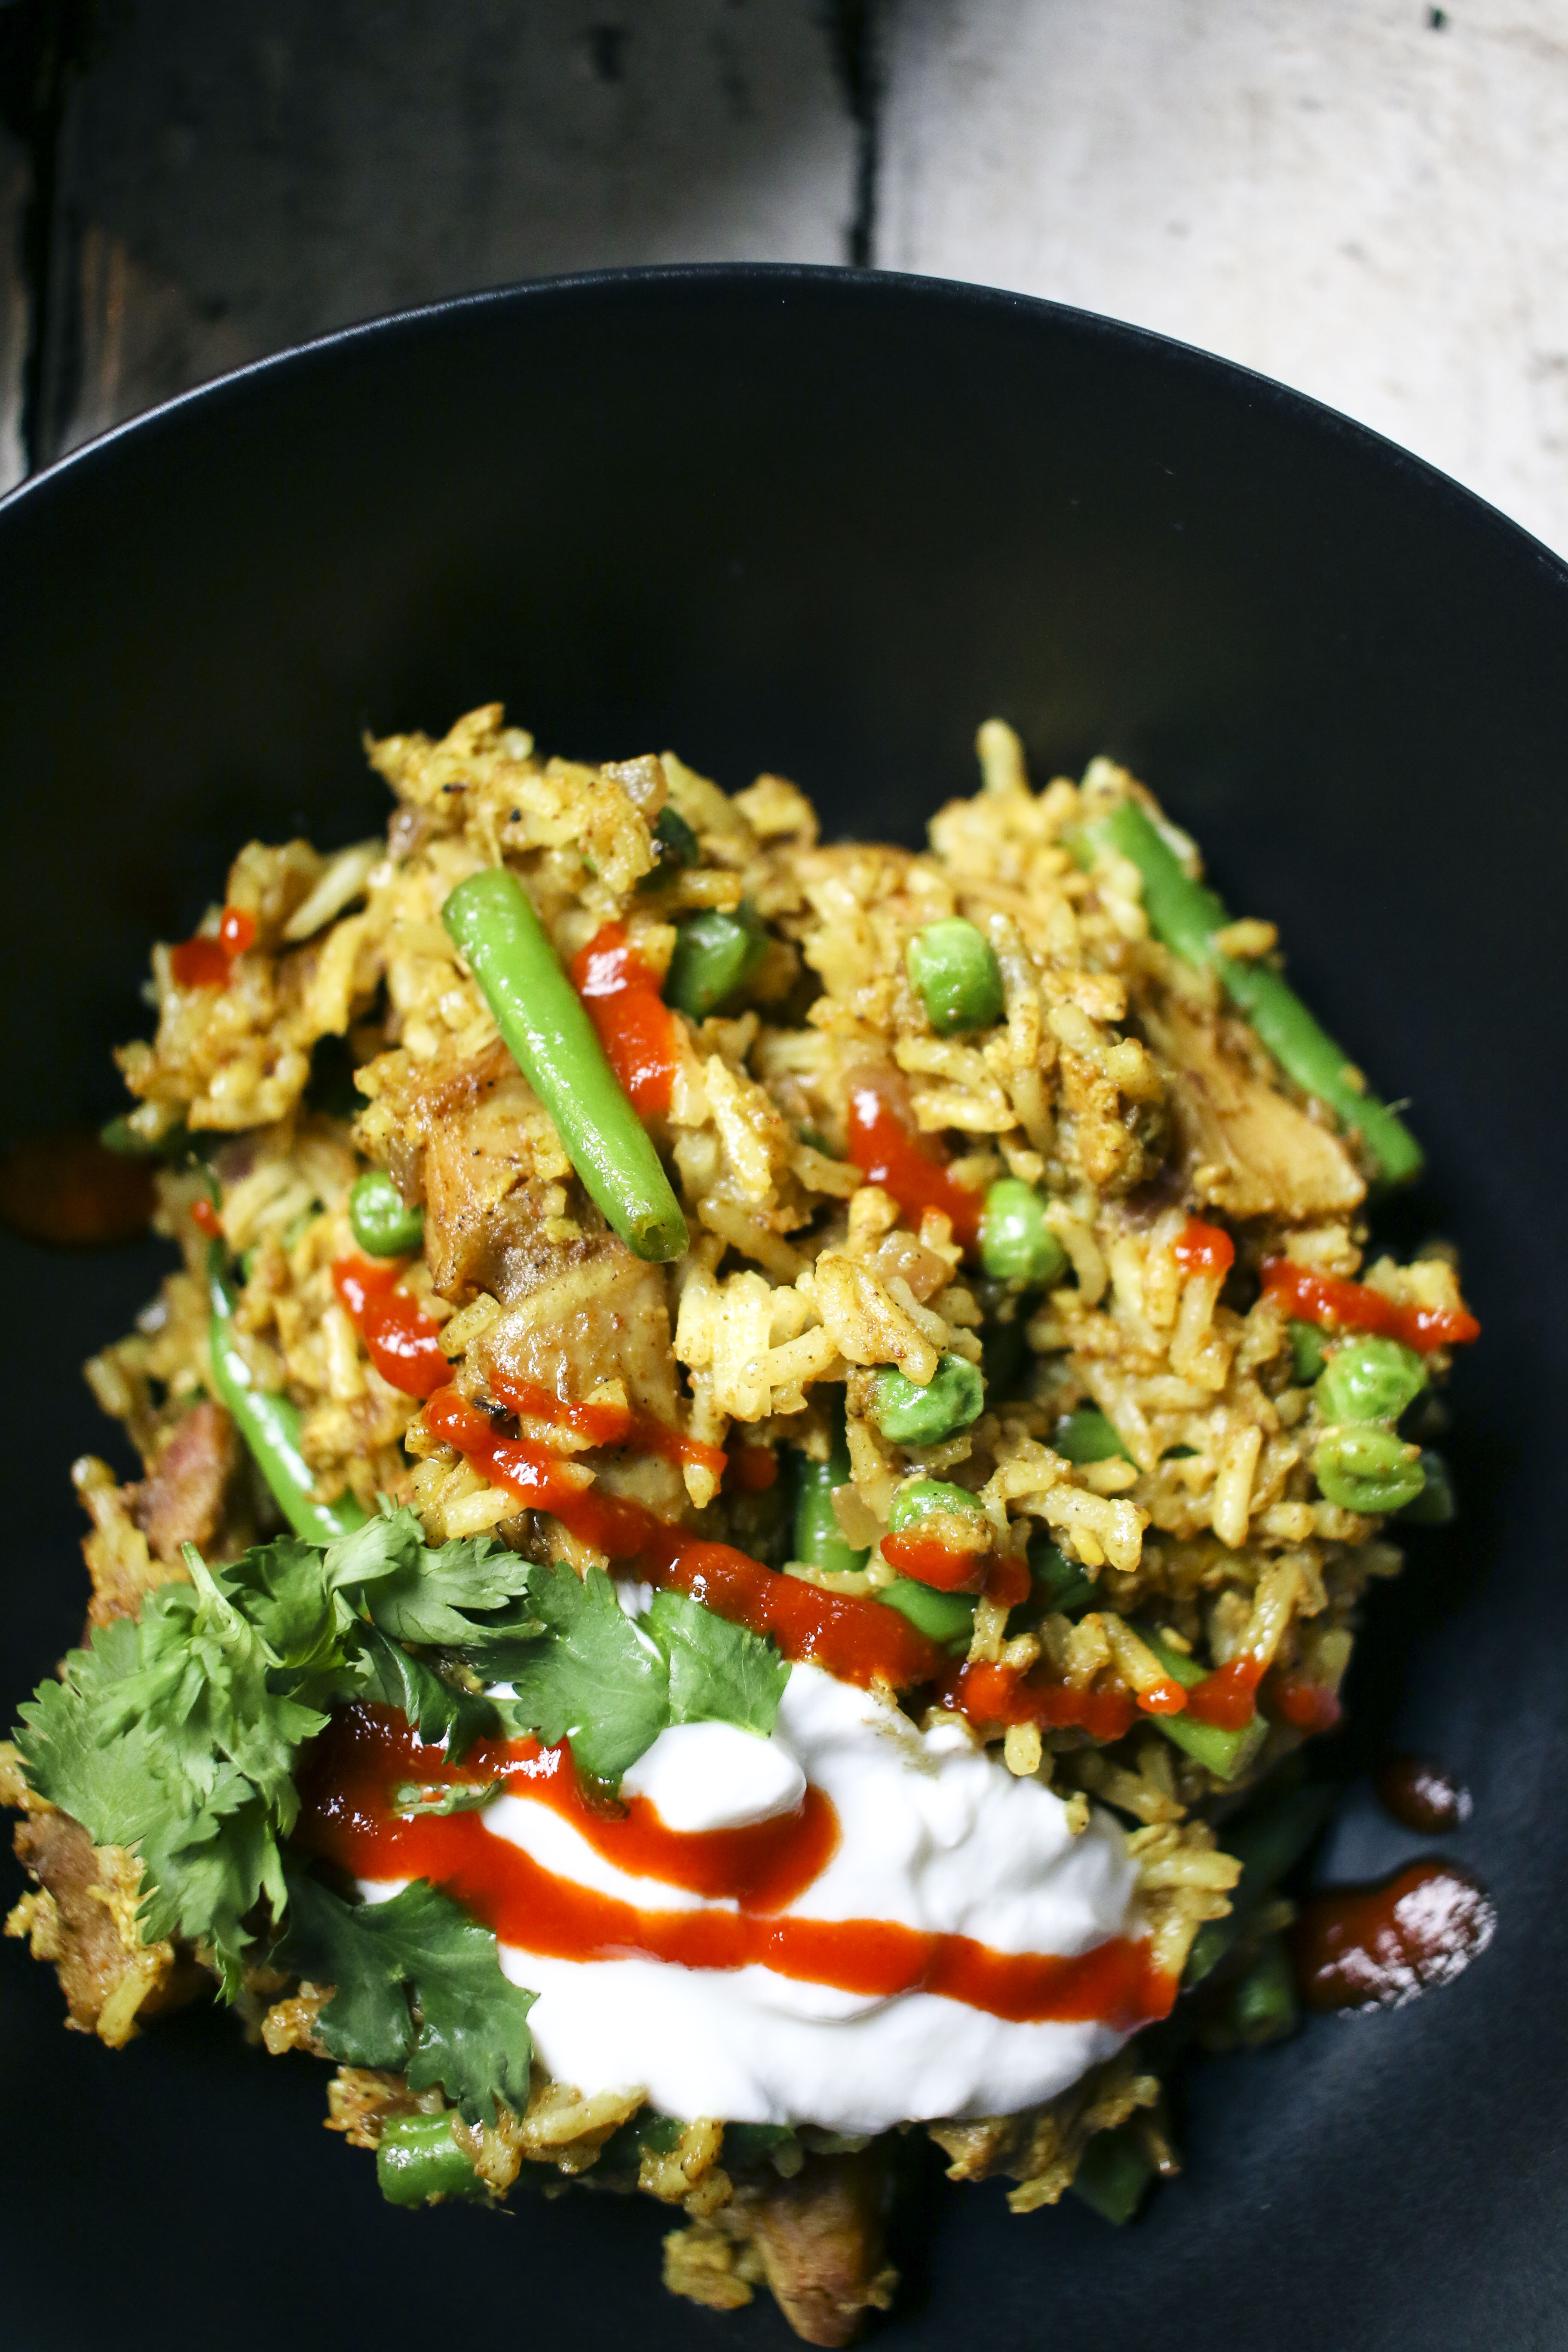 Easy & Fast Chicken Curry Fried Rice | I Will Not Eat Oysters